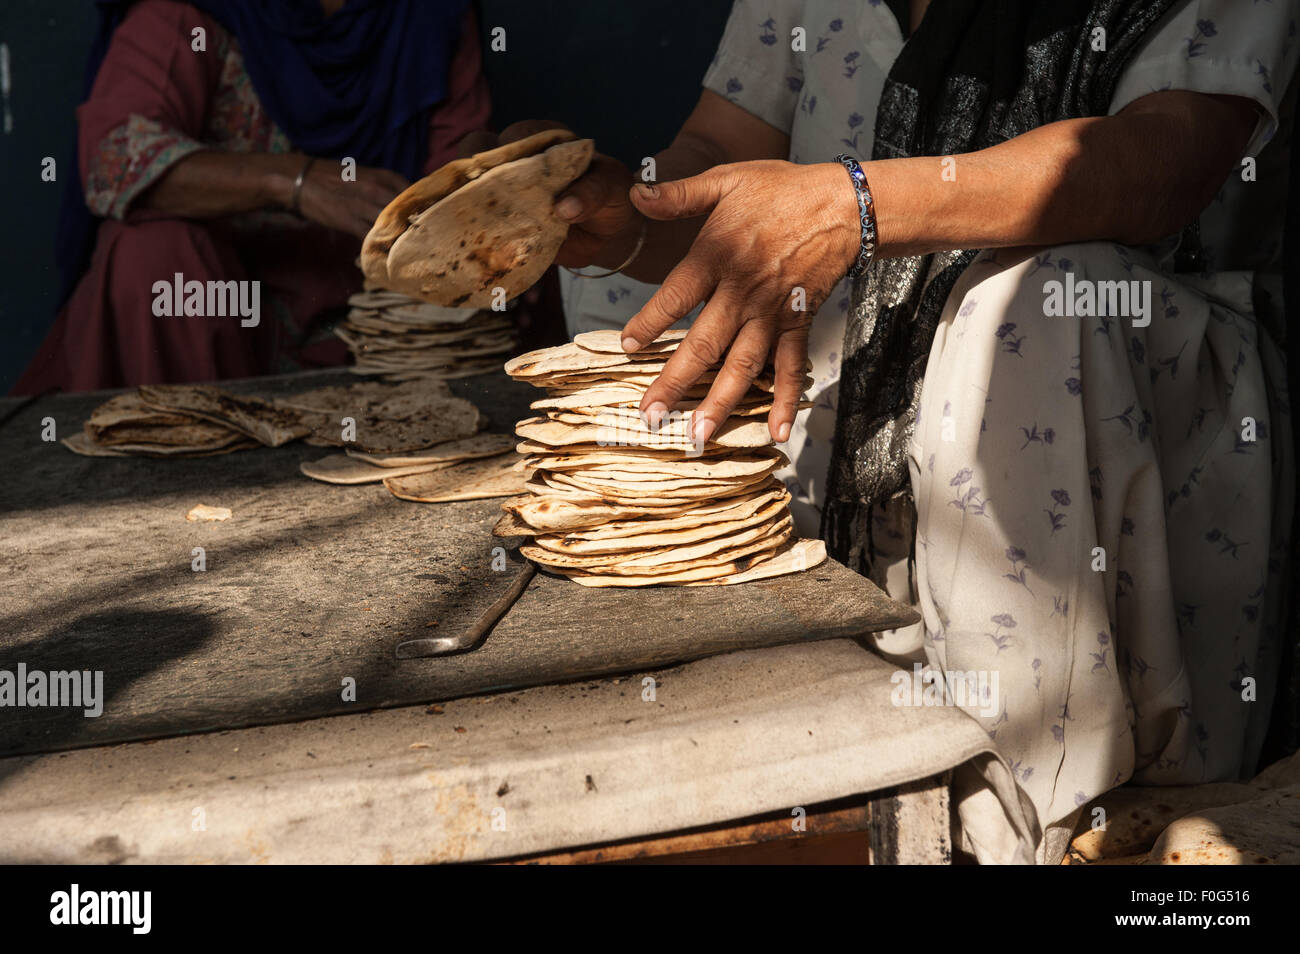 Amritsar, Punjab, India. Sri Harmandir Sahib Golden Temple. A woman stacks roti flatbreads in the free kitchen - langar - which feeds tens of thousands of people each day. Stock Photo